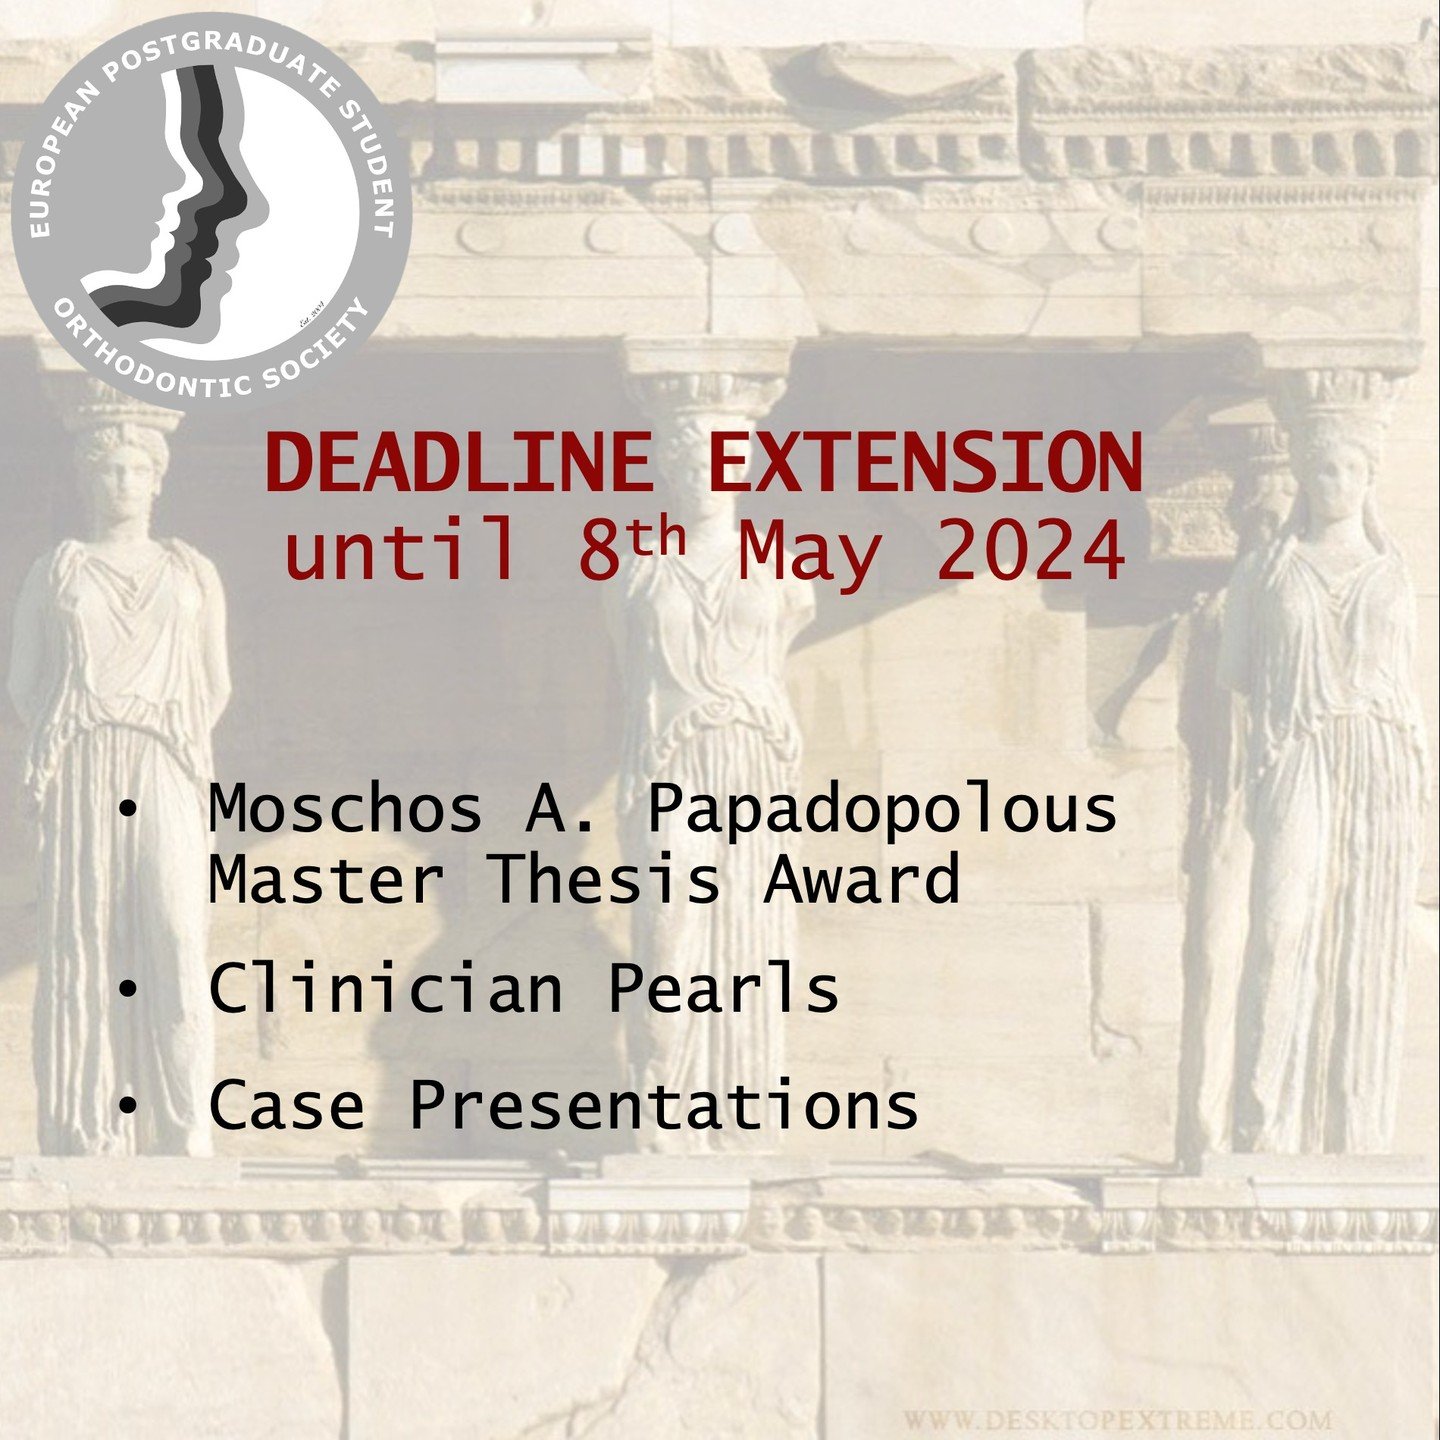 ANNOUNCEMENT:

The deadline for submissions of clinical pearls, completed cases, and Moschos A. Papadopoulos Thesis award has been extended to Wednesday 8th May 23:59 CET. 

Send us your entries NOW!